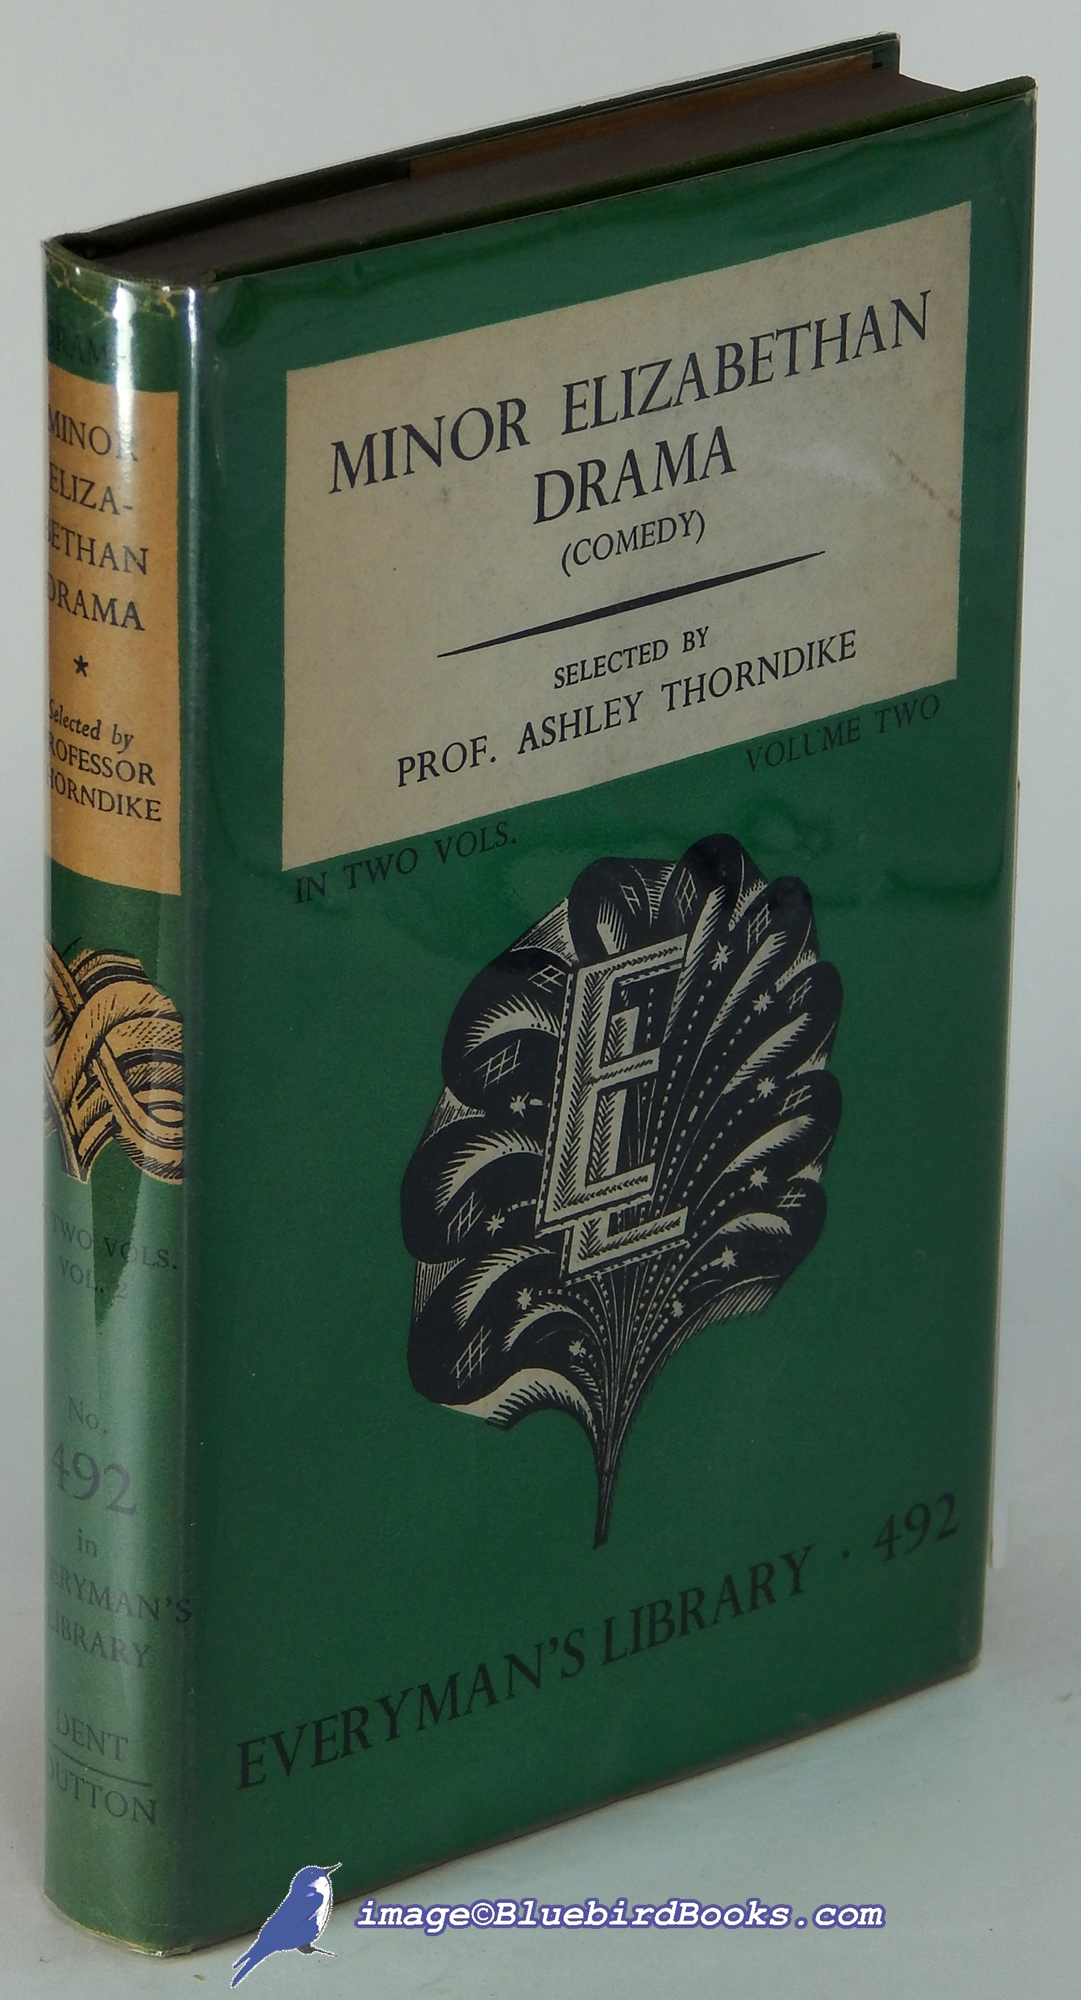 THORNDIKE, ASHLEY (INTRODUCTION) - Minor Elizabethan Drama: In Two Volumes, Volume Two Only, Pre-Shakespearean Comedies (Everyman's Library #492, Poetry and Drama Series)